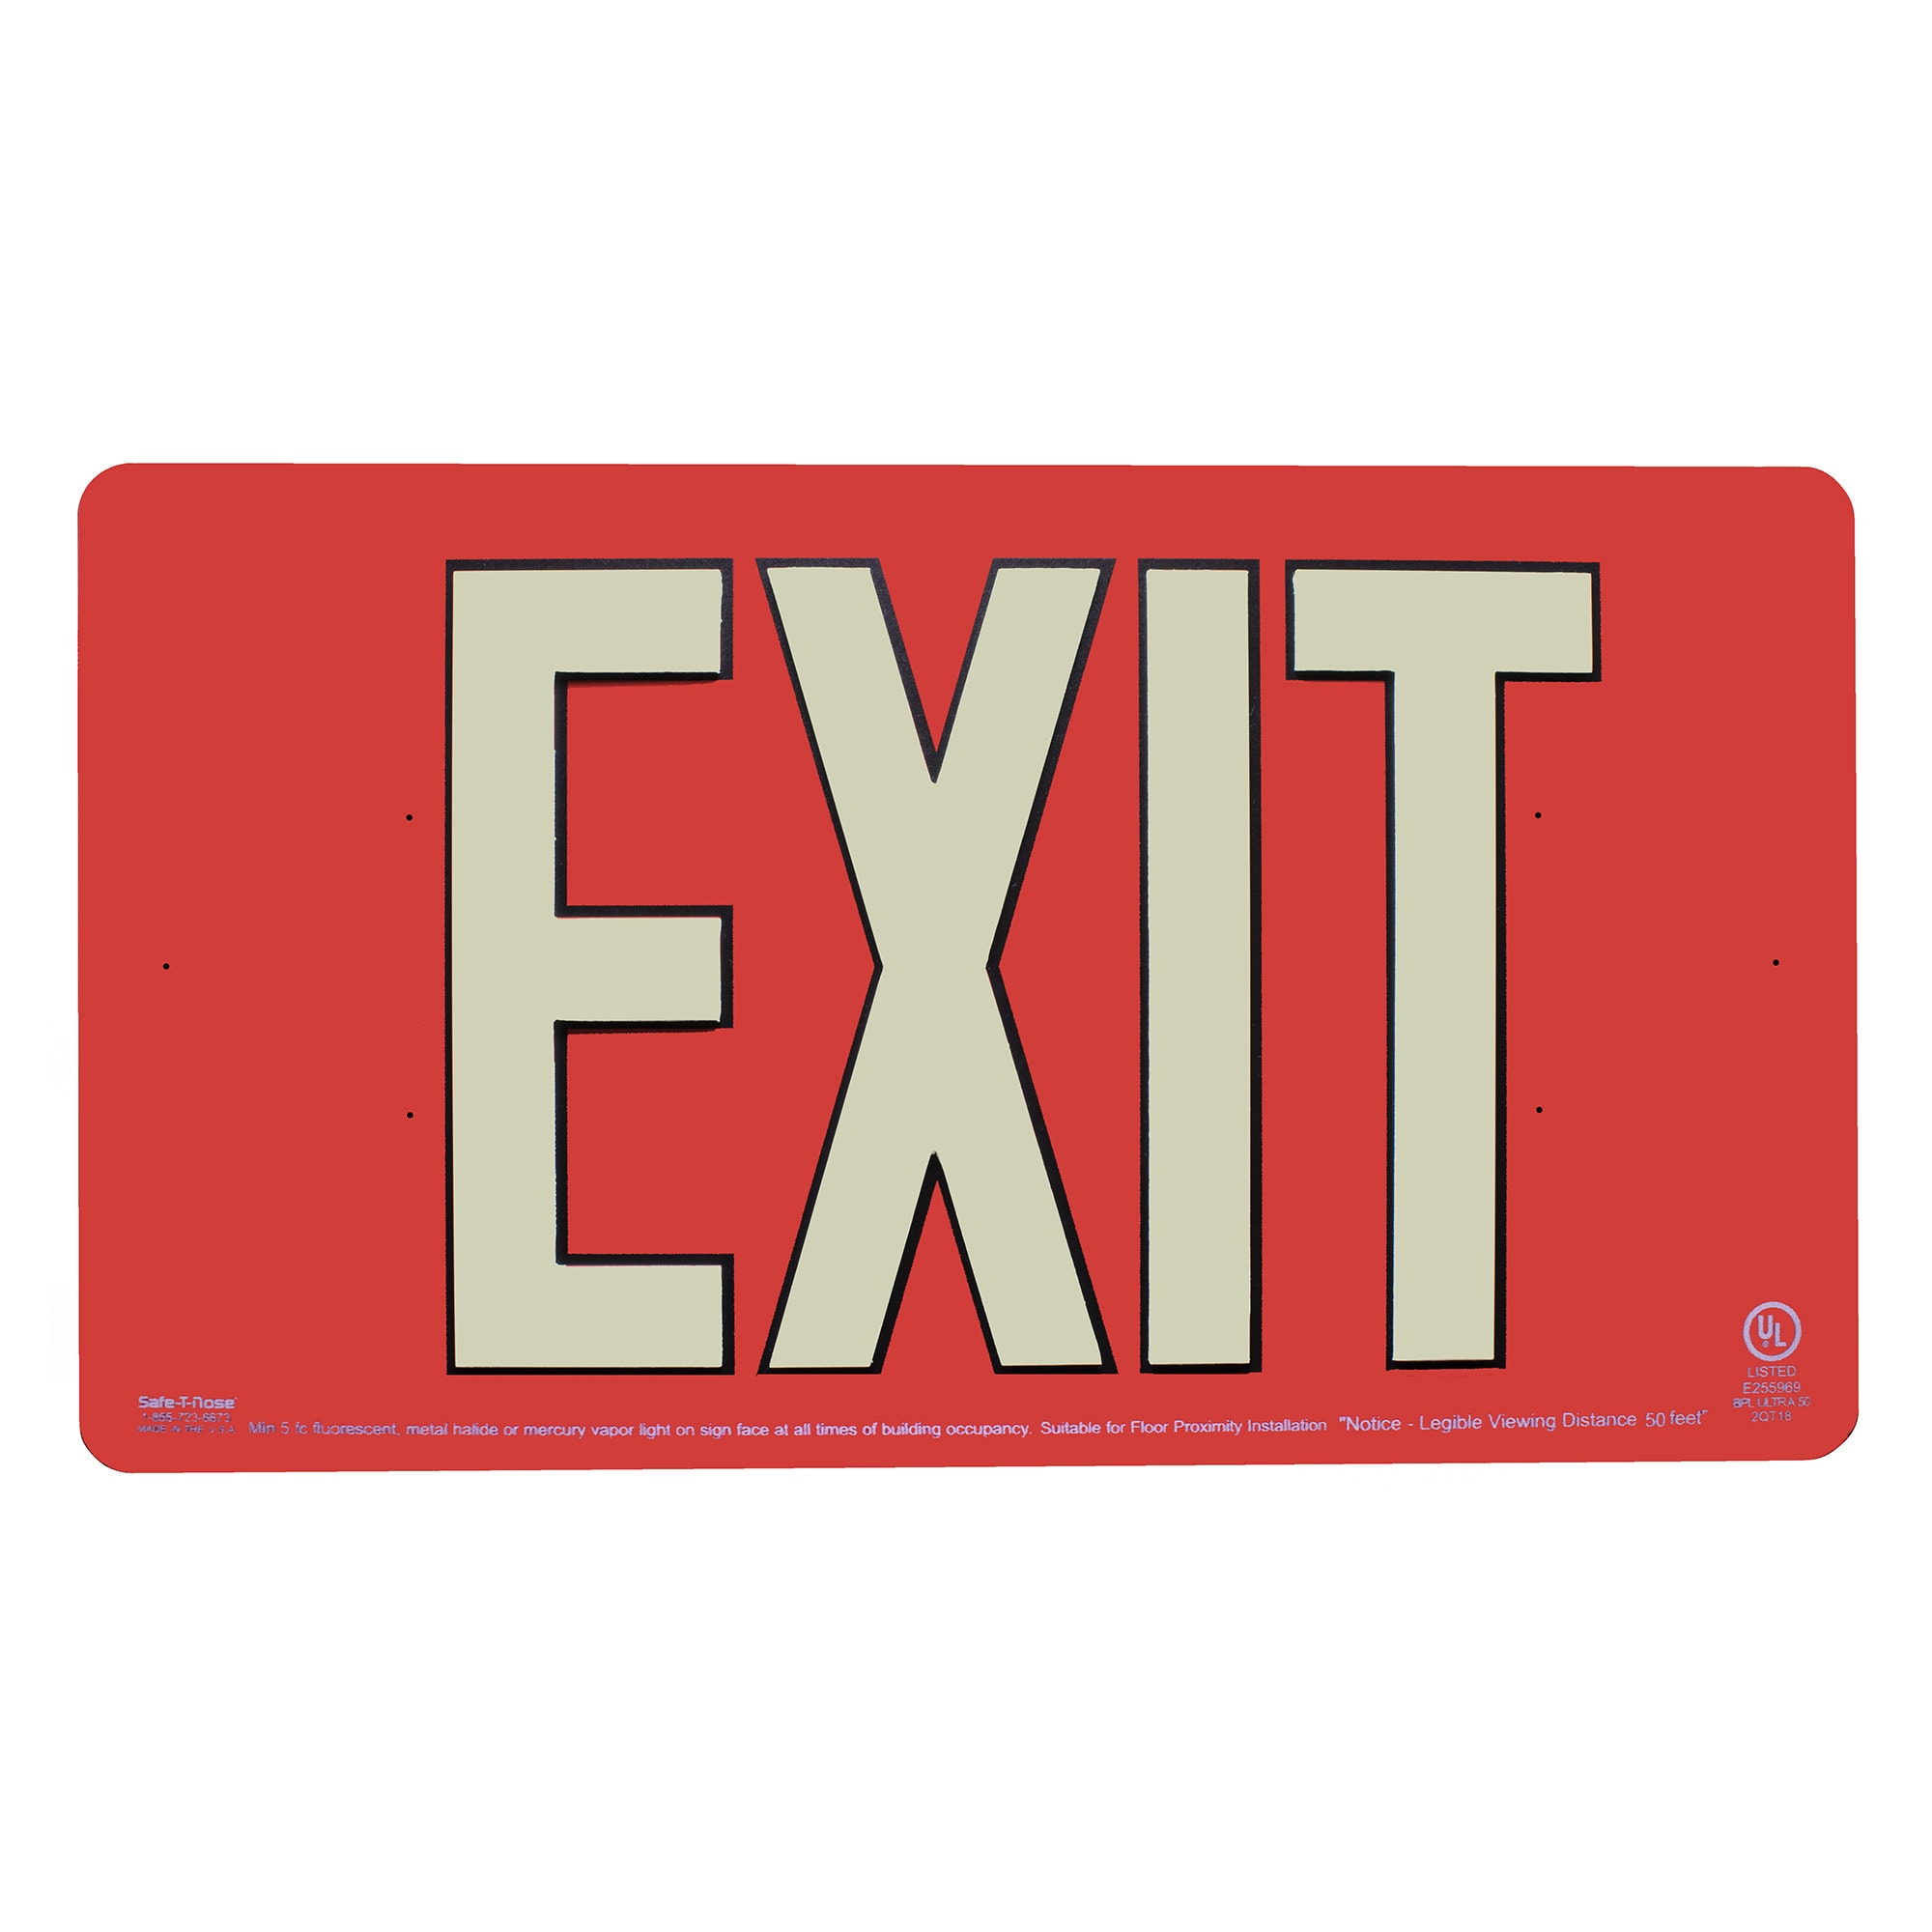 Pack of 1 EXIT with Left Arrow Symbol Ceiling Mount Safe Glow Photoluminescent Exit Sign 14-5/8 Length x 9-1/2 Width x 1/4  Height